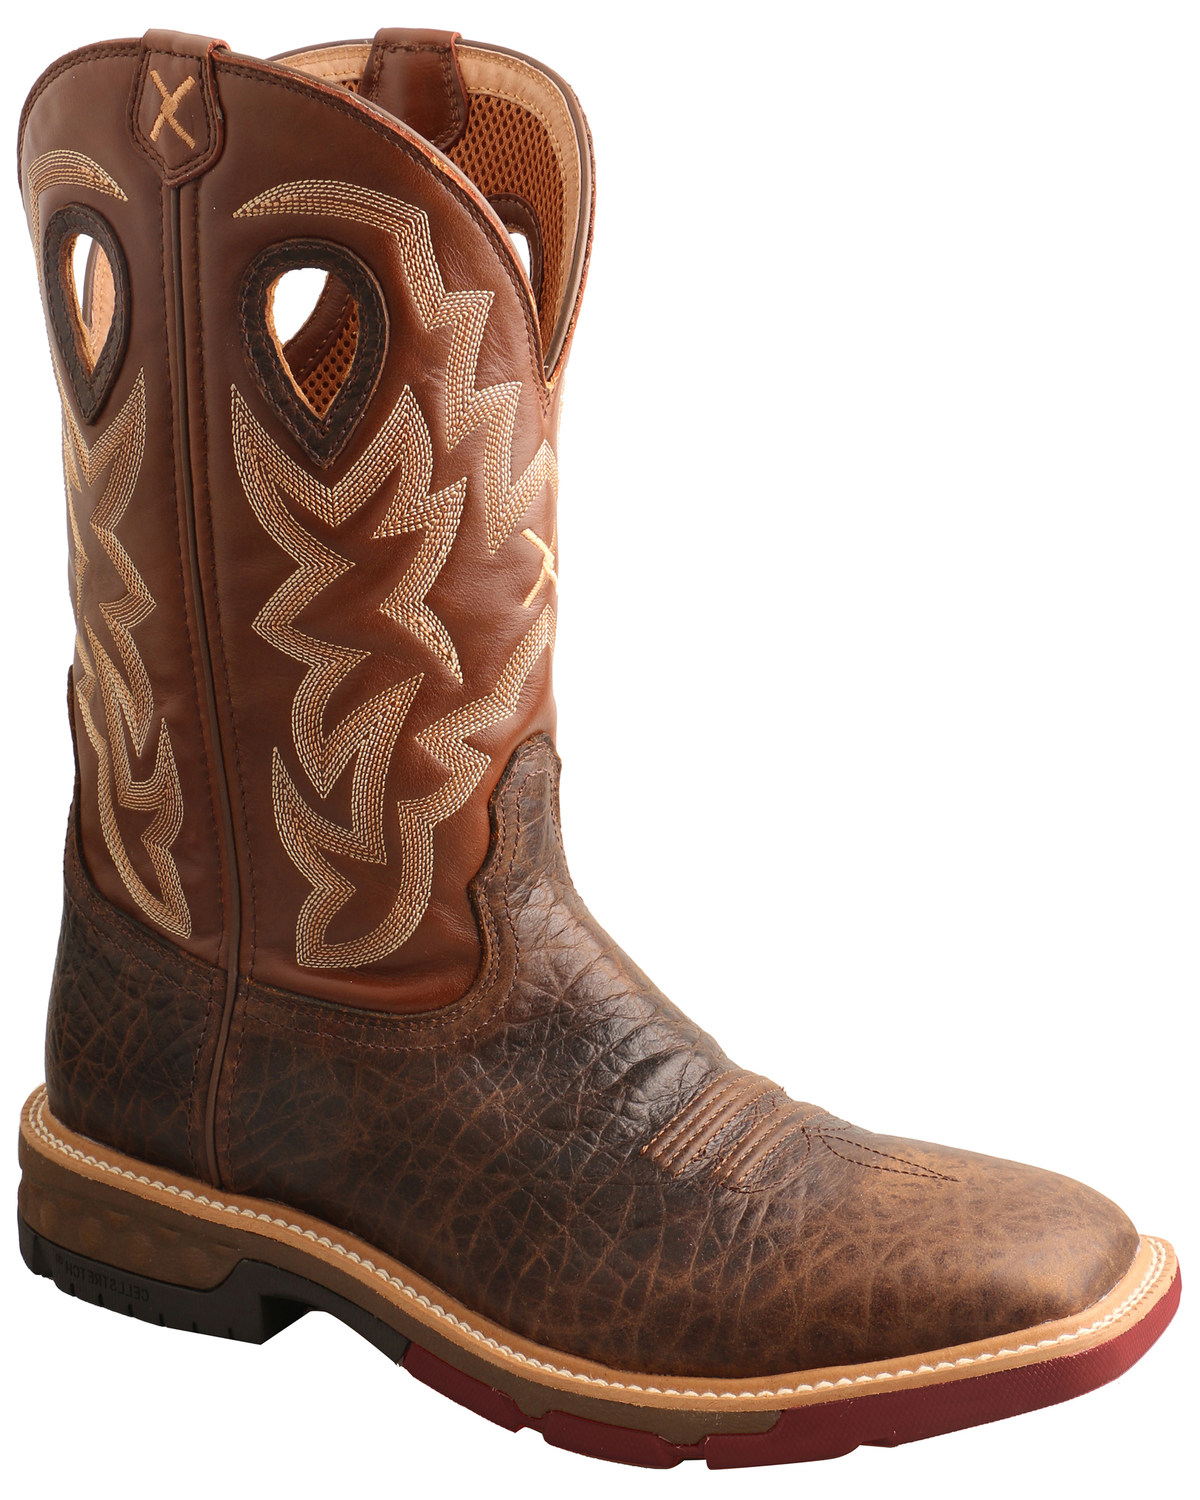 Twisted X Men's Brown Western Work Boots - Soft Toe